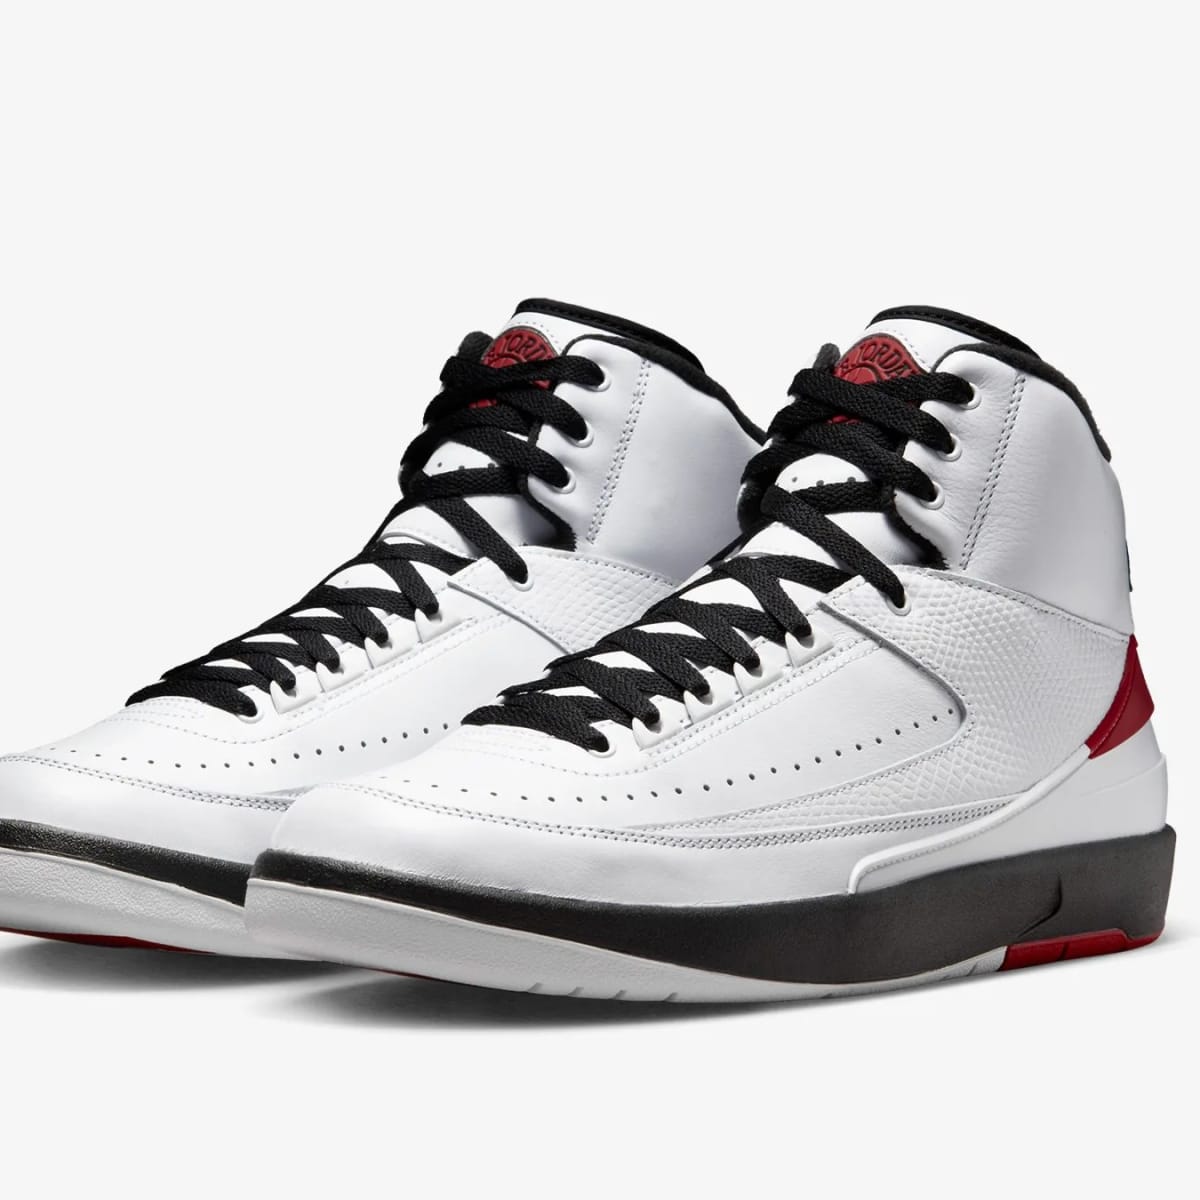 How to Buy the Air Jordan 2 'Chicago 